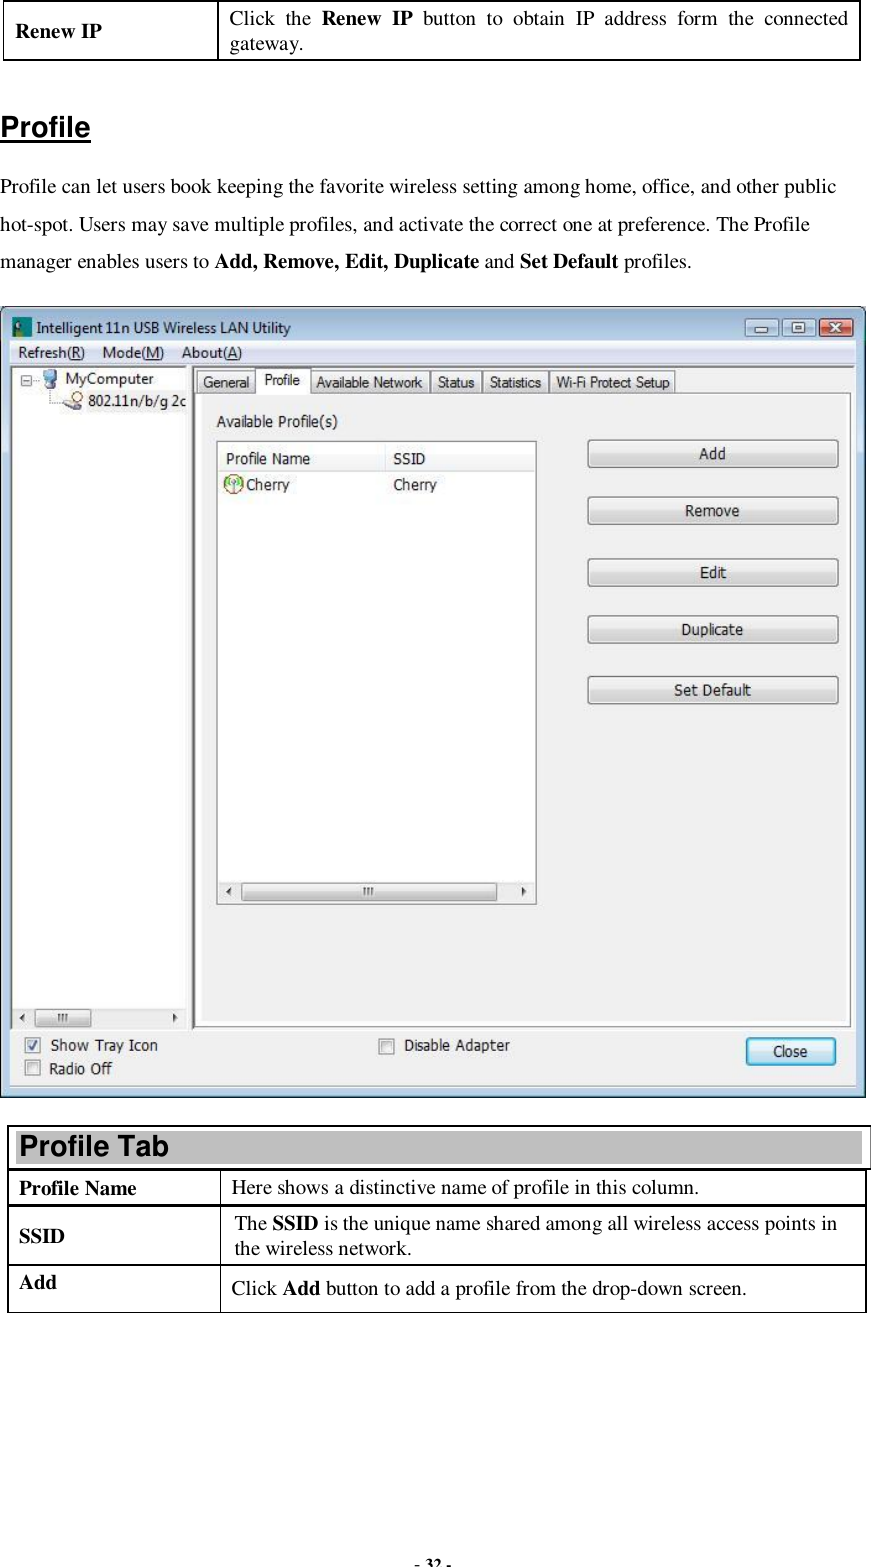  - 32 - Renew IP  Click the  Renew IP button to obtain IP address form the connected gateway.  Profile Profile can let users book keeping the favorite wireless setting among home, office, and other public hot-spot. Users may save multiple profiles, and activate the correct one at preference. The Profile manager enables users to Add, Remove, Edit, Duplicate and Set Default profiles.  Profile Tab Profile Name  Here shows a distinctive name of profile in this column. SSID  The SSID is the unique name shared among all wireless access points in the wireless network. Add  Click Add button to add a profile from the drop-down screen. 